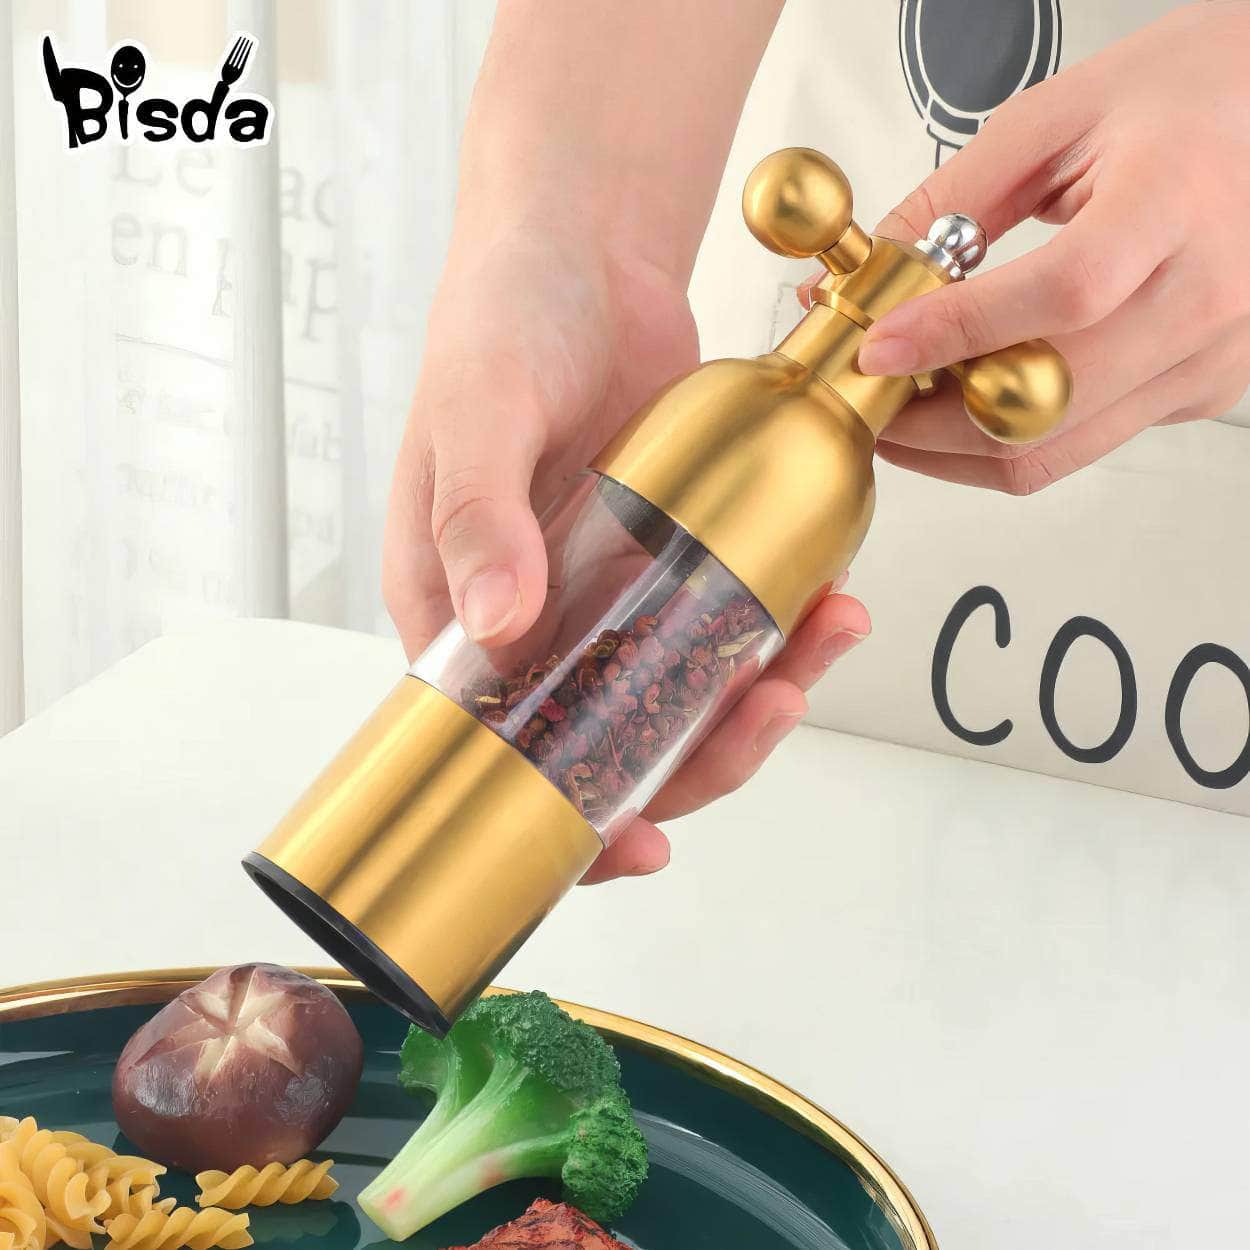 Stainless Steel Salt and Pepper Grinder - Ceramic Spice Mill for Cooking